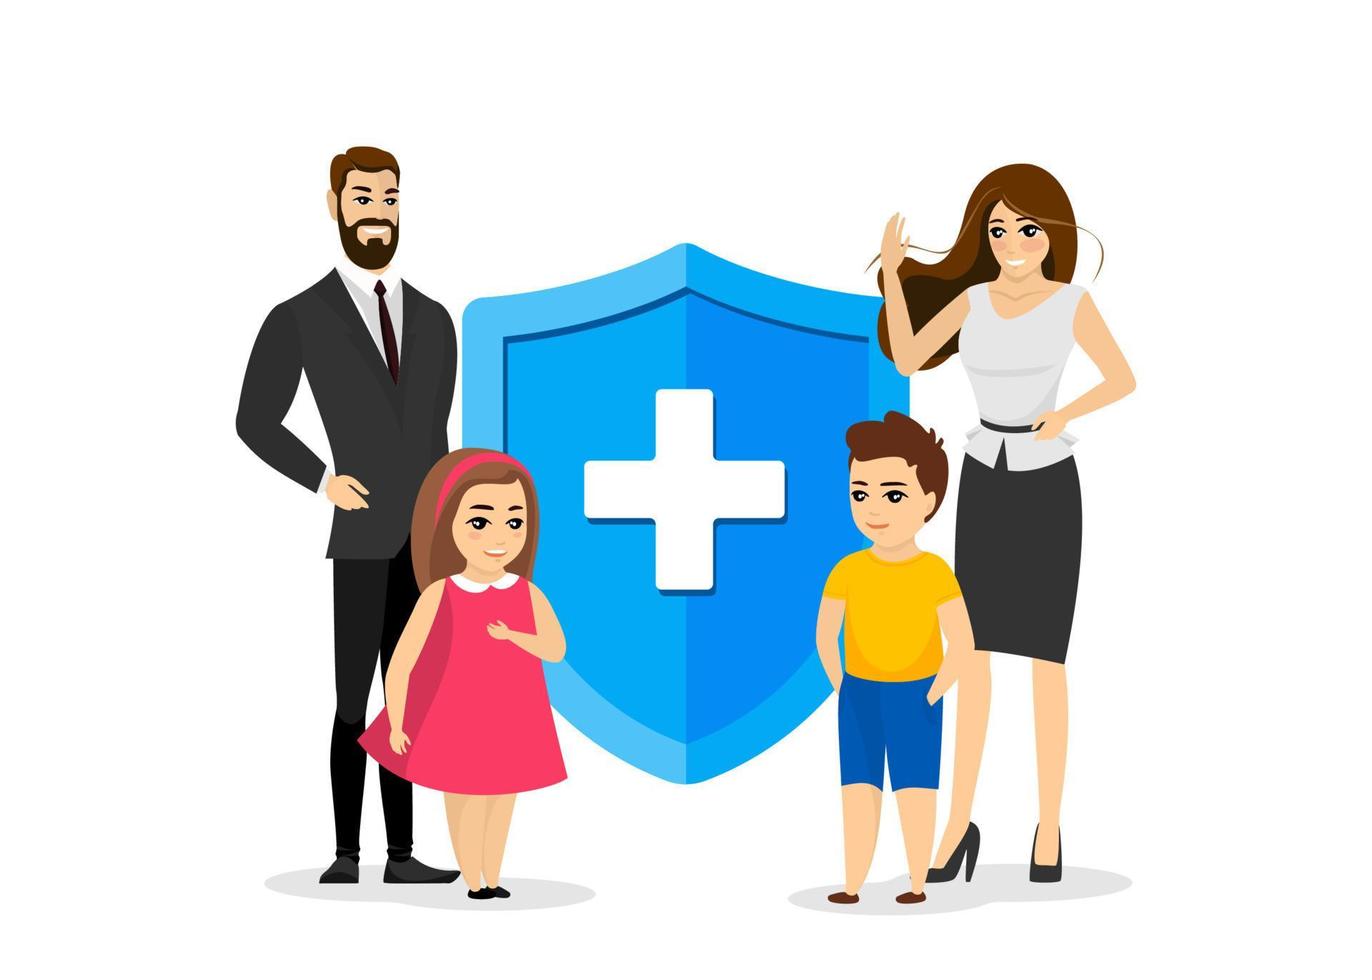 Family life and health insurance banner concept. Parents and children near protection shield with medical symbol. Young couple and kids medical support. Healthcare vector eps illustration